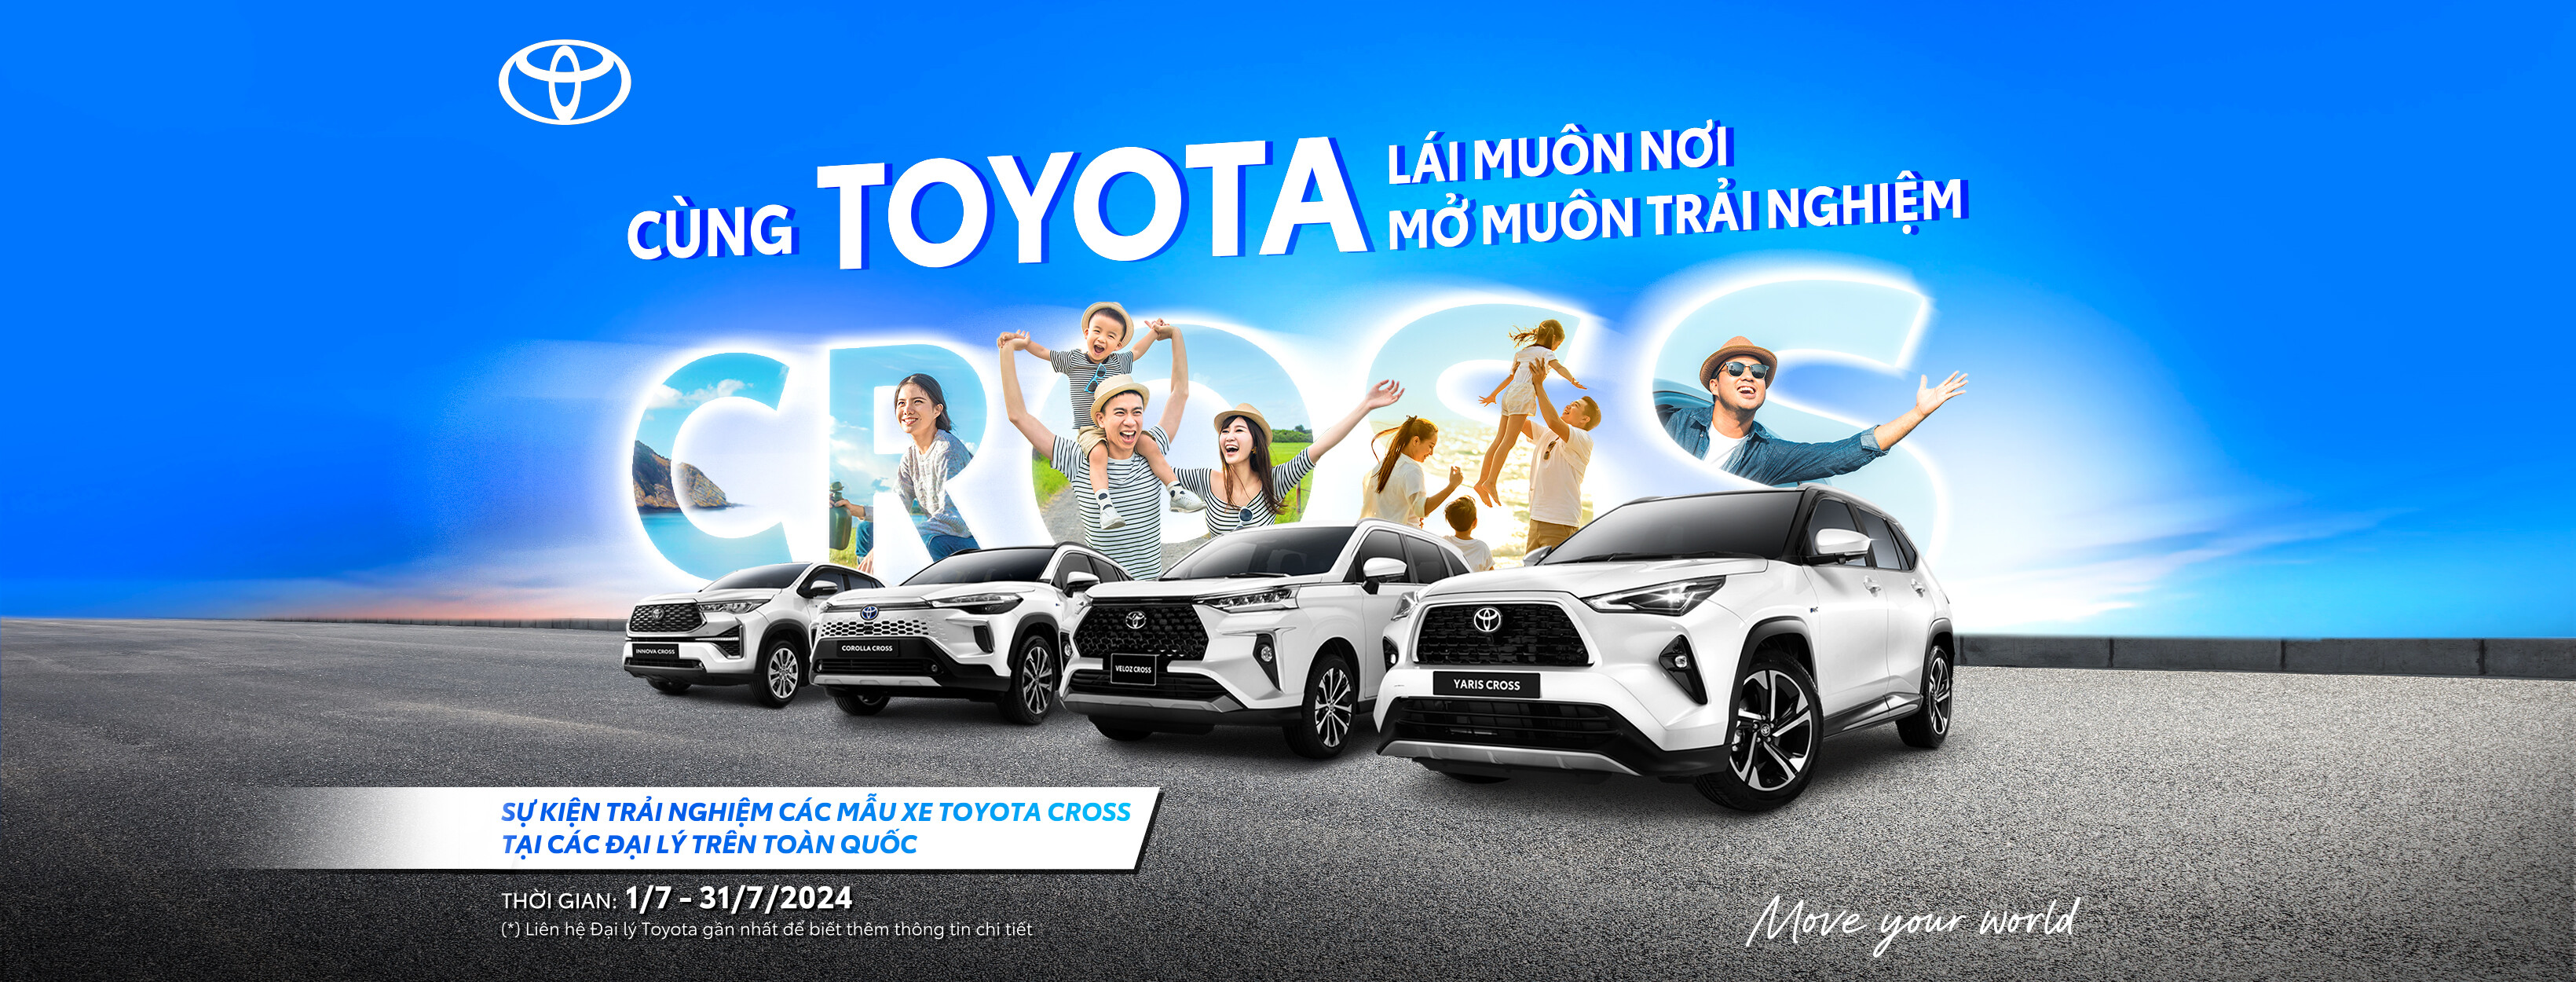 Cover image for TOYOTA VIET NAM